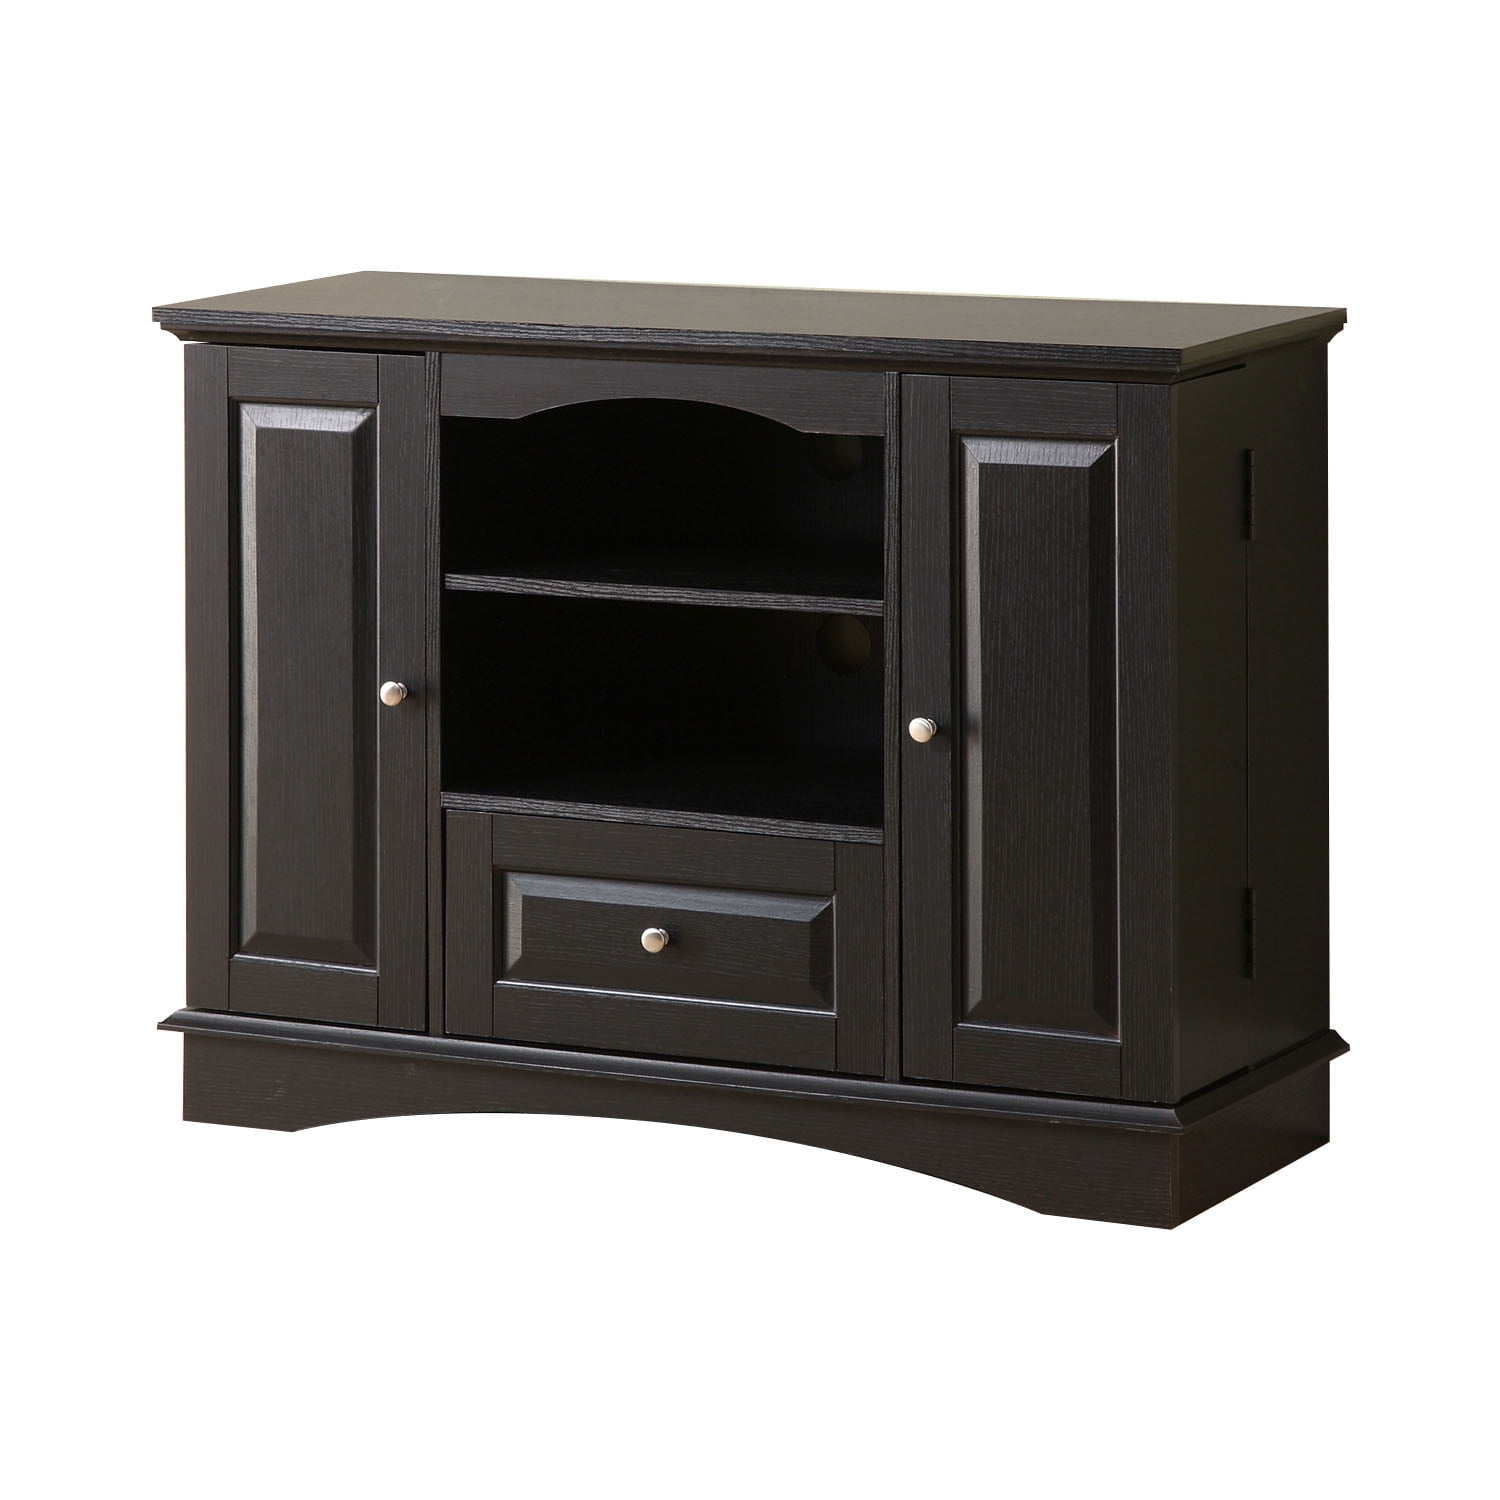 temperament wheat plans Walker Edison Traditional Tall 42 in. Black TV Stand 48 in. with Doors -  Walmart.com